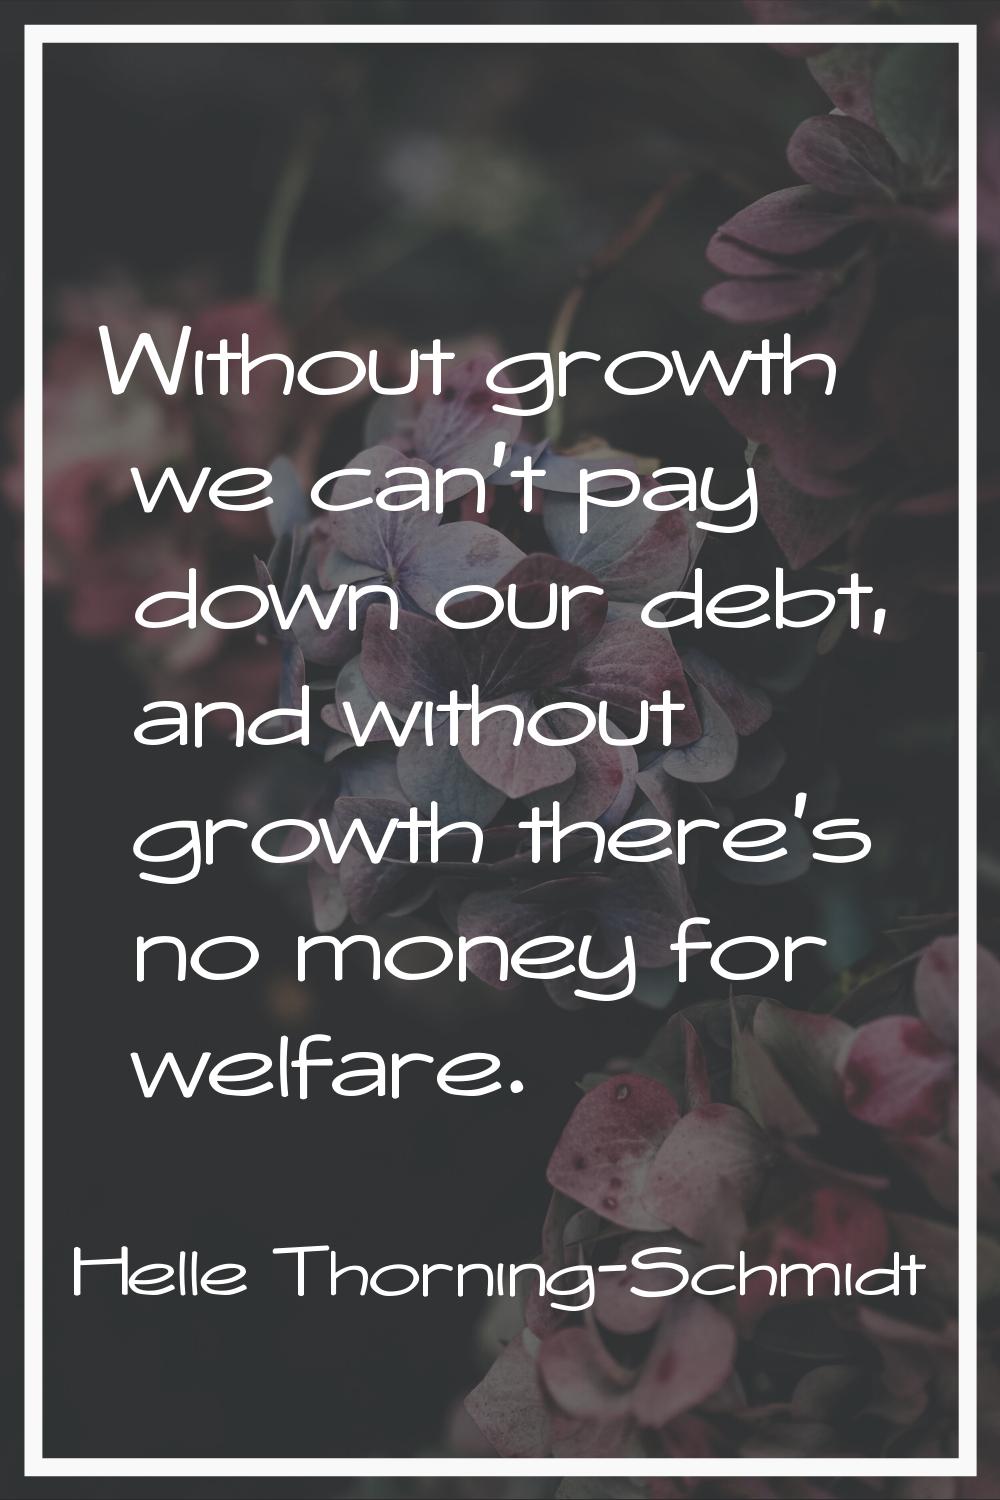 Without growth we can't pay down our debt, and without growth there's no money for welfare.